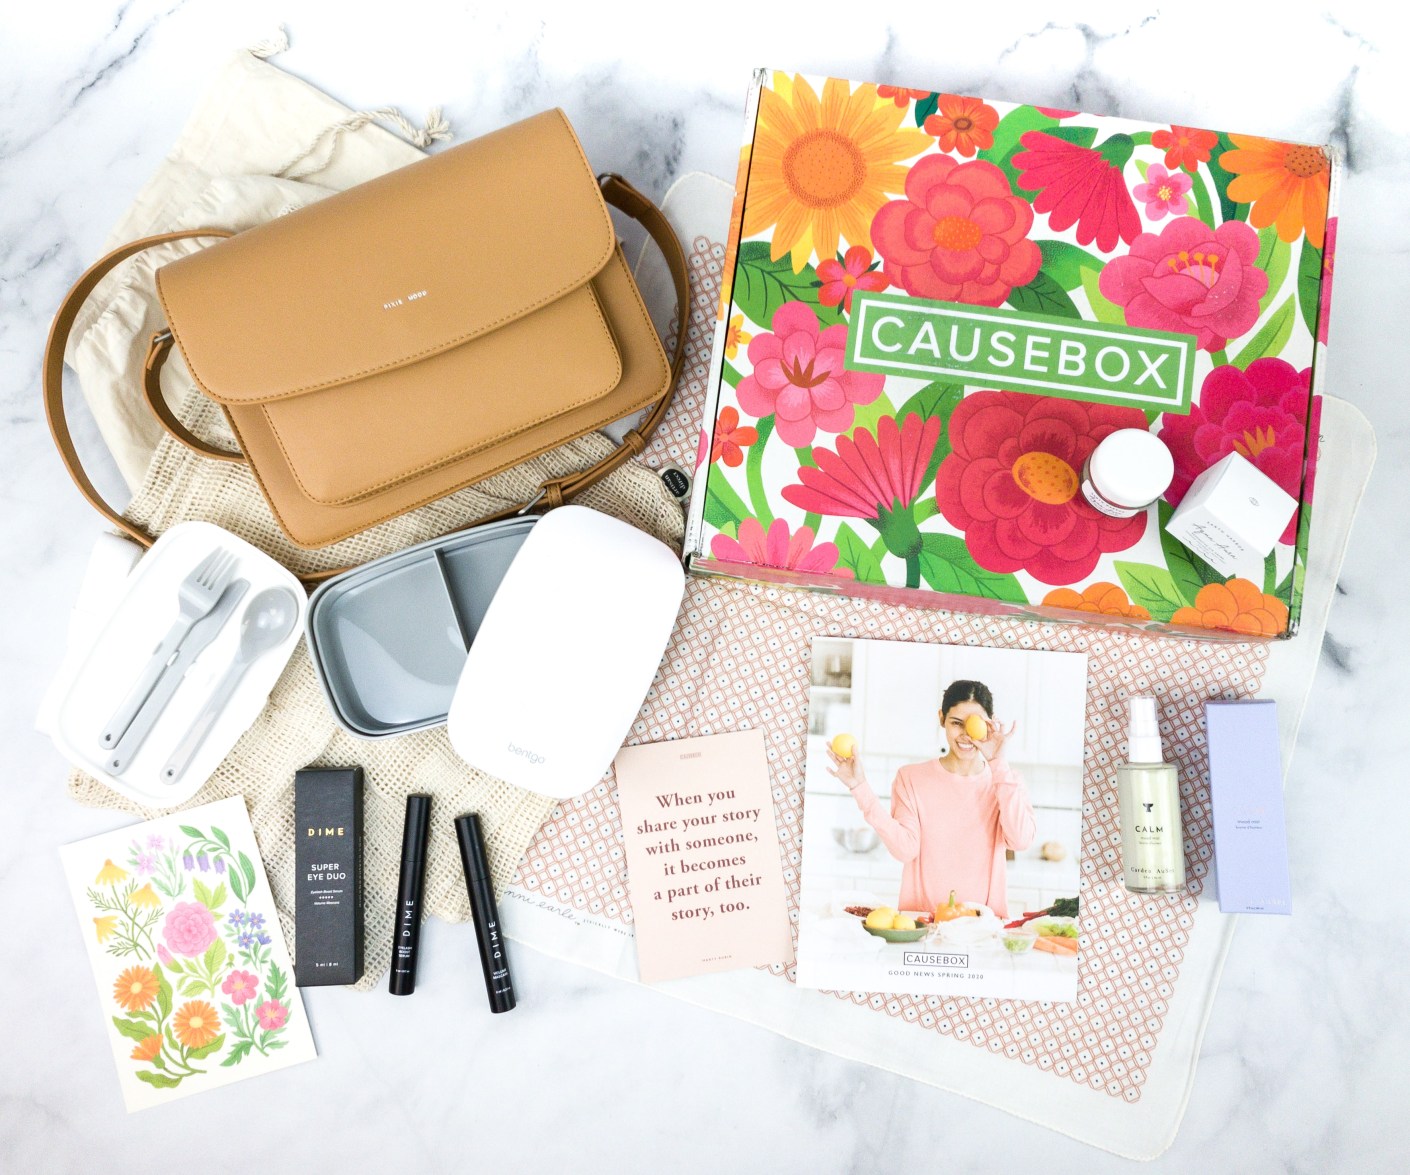 CAUSEBOX Reviews Get All The Details At Hello Subscription!